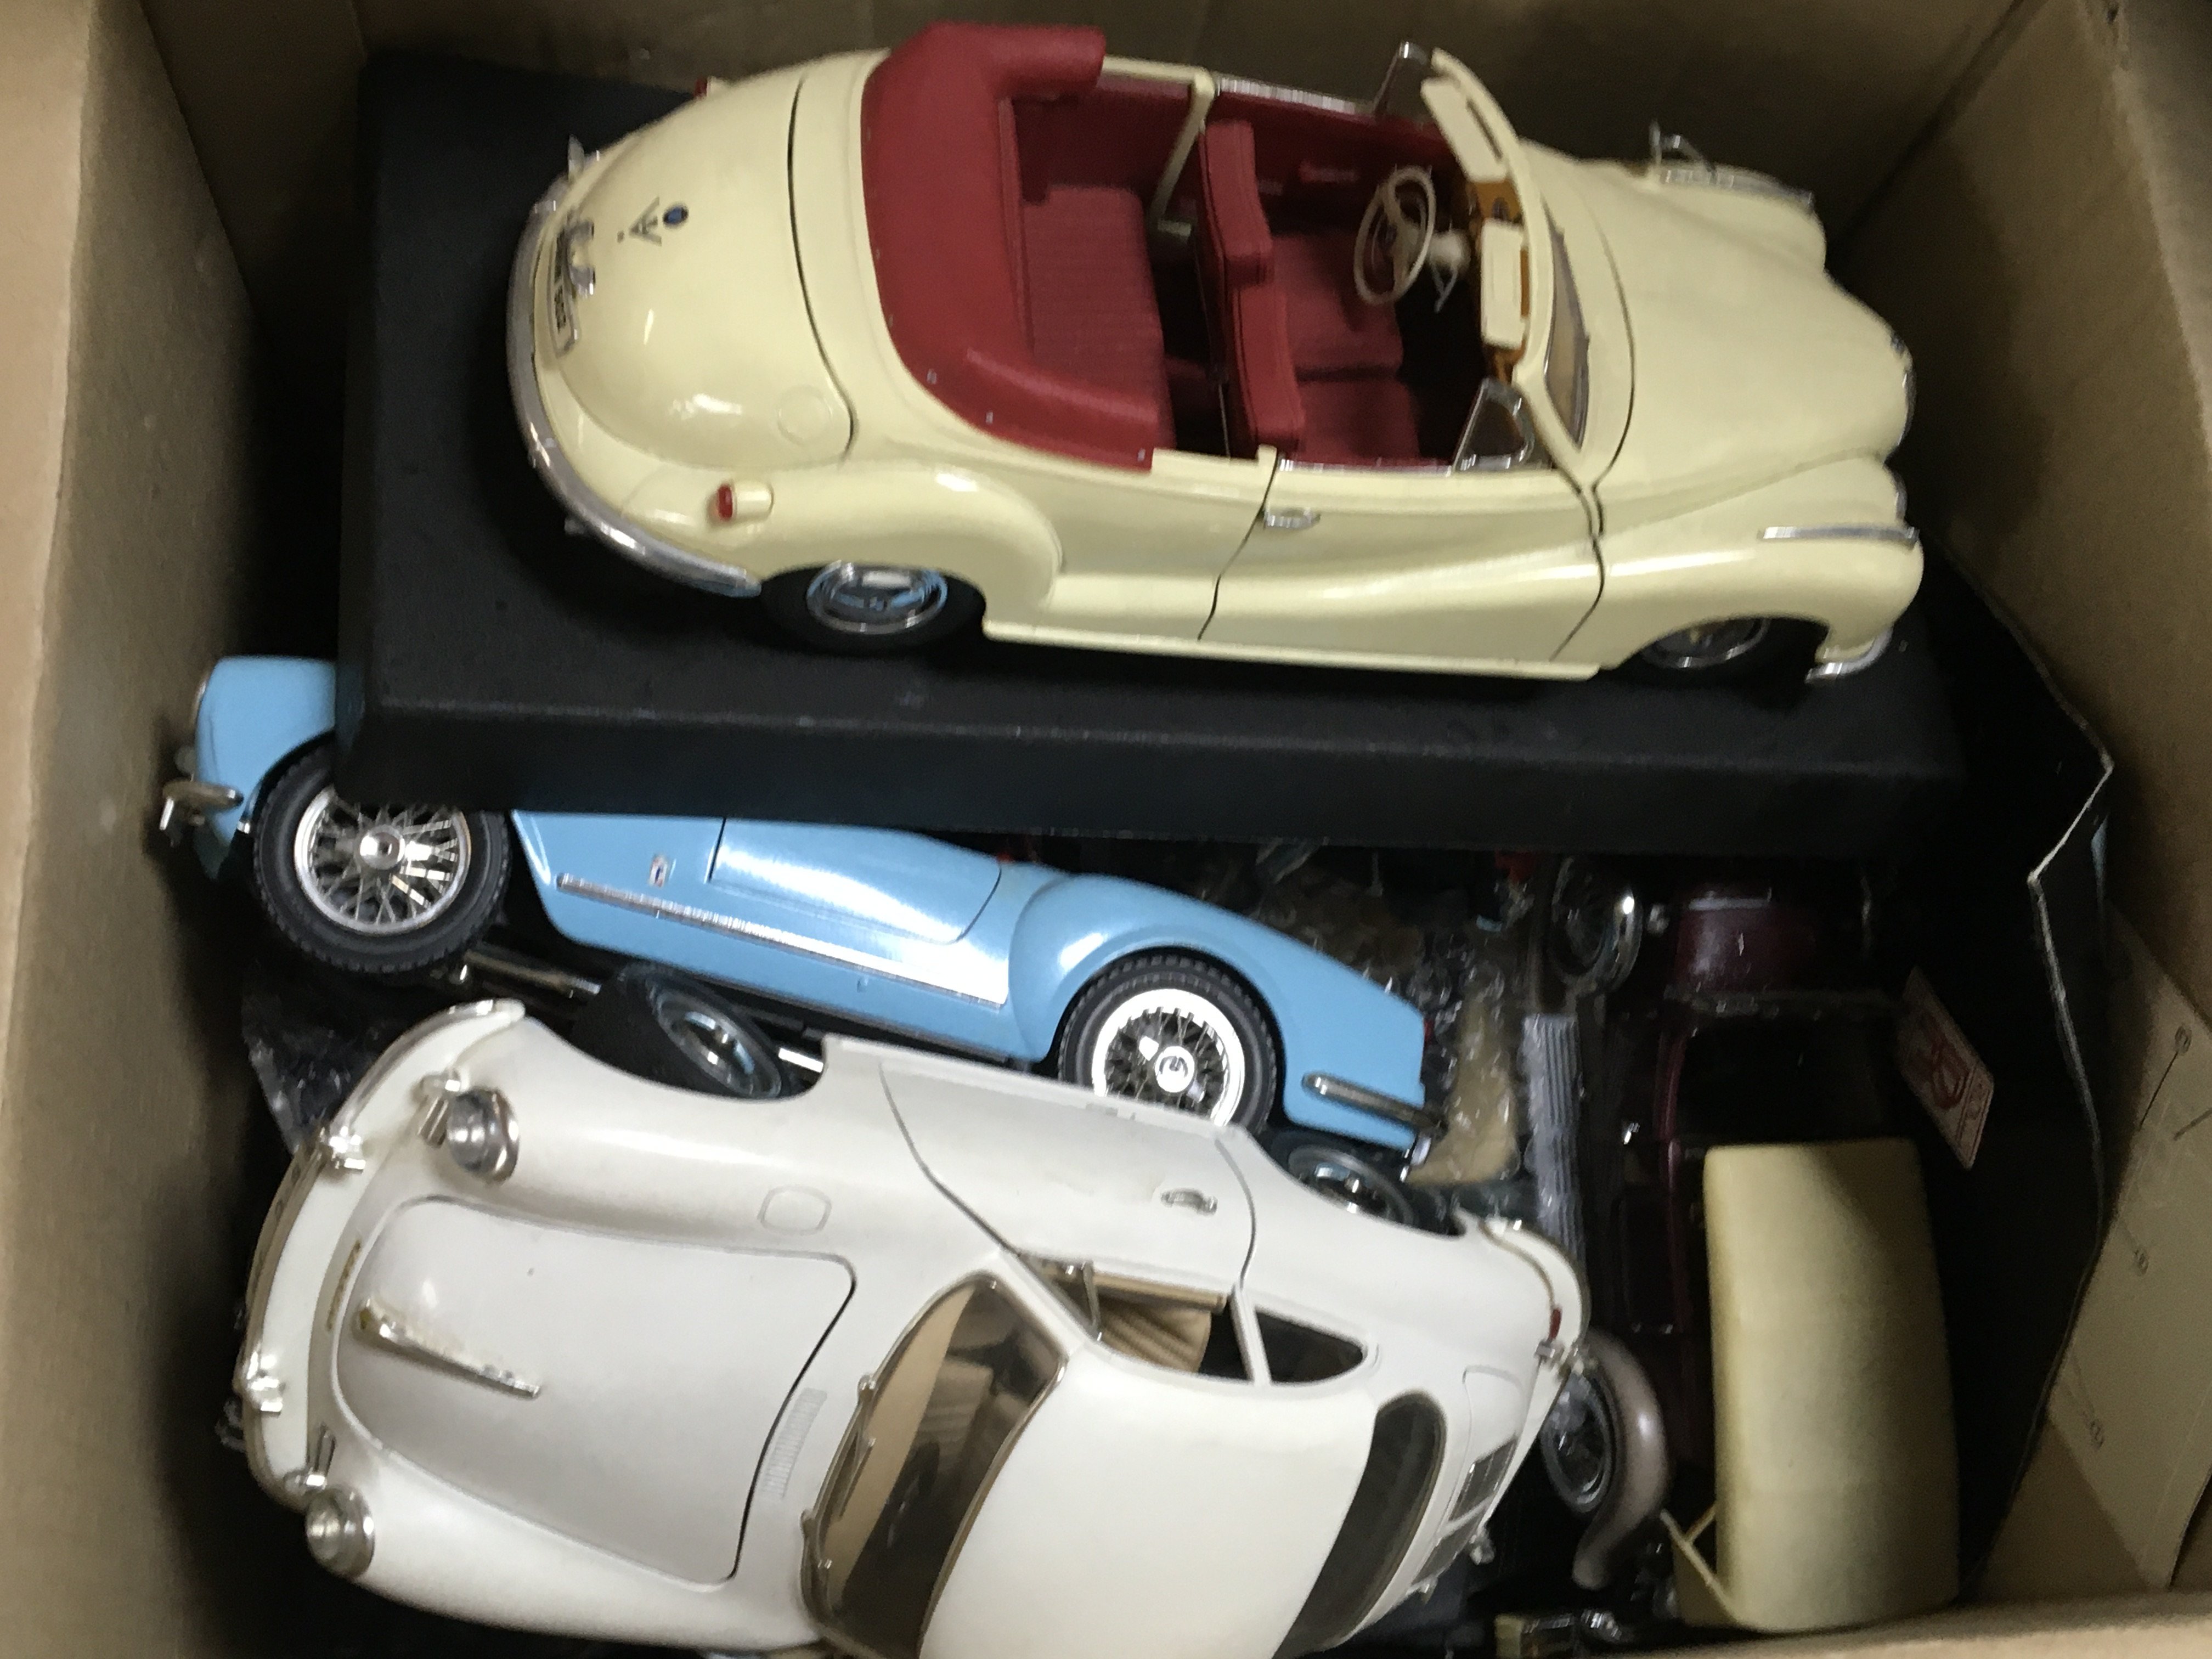 A box containing scale model cars.